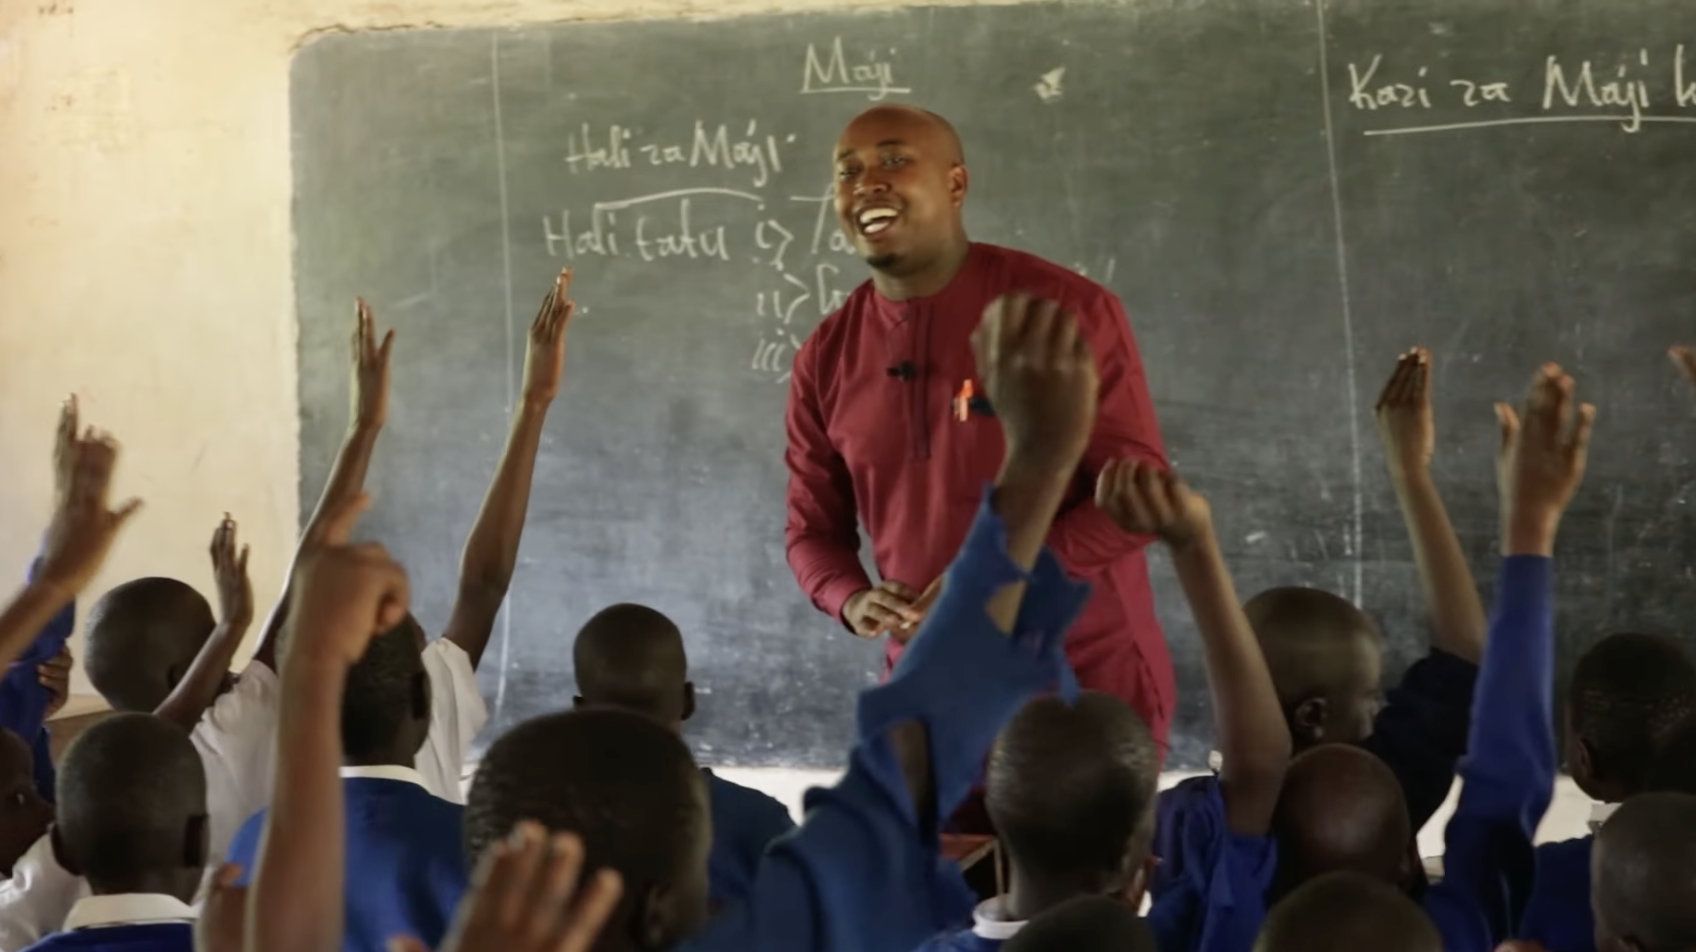 We continue to expand our Teacher Professional Development project in Africa